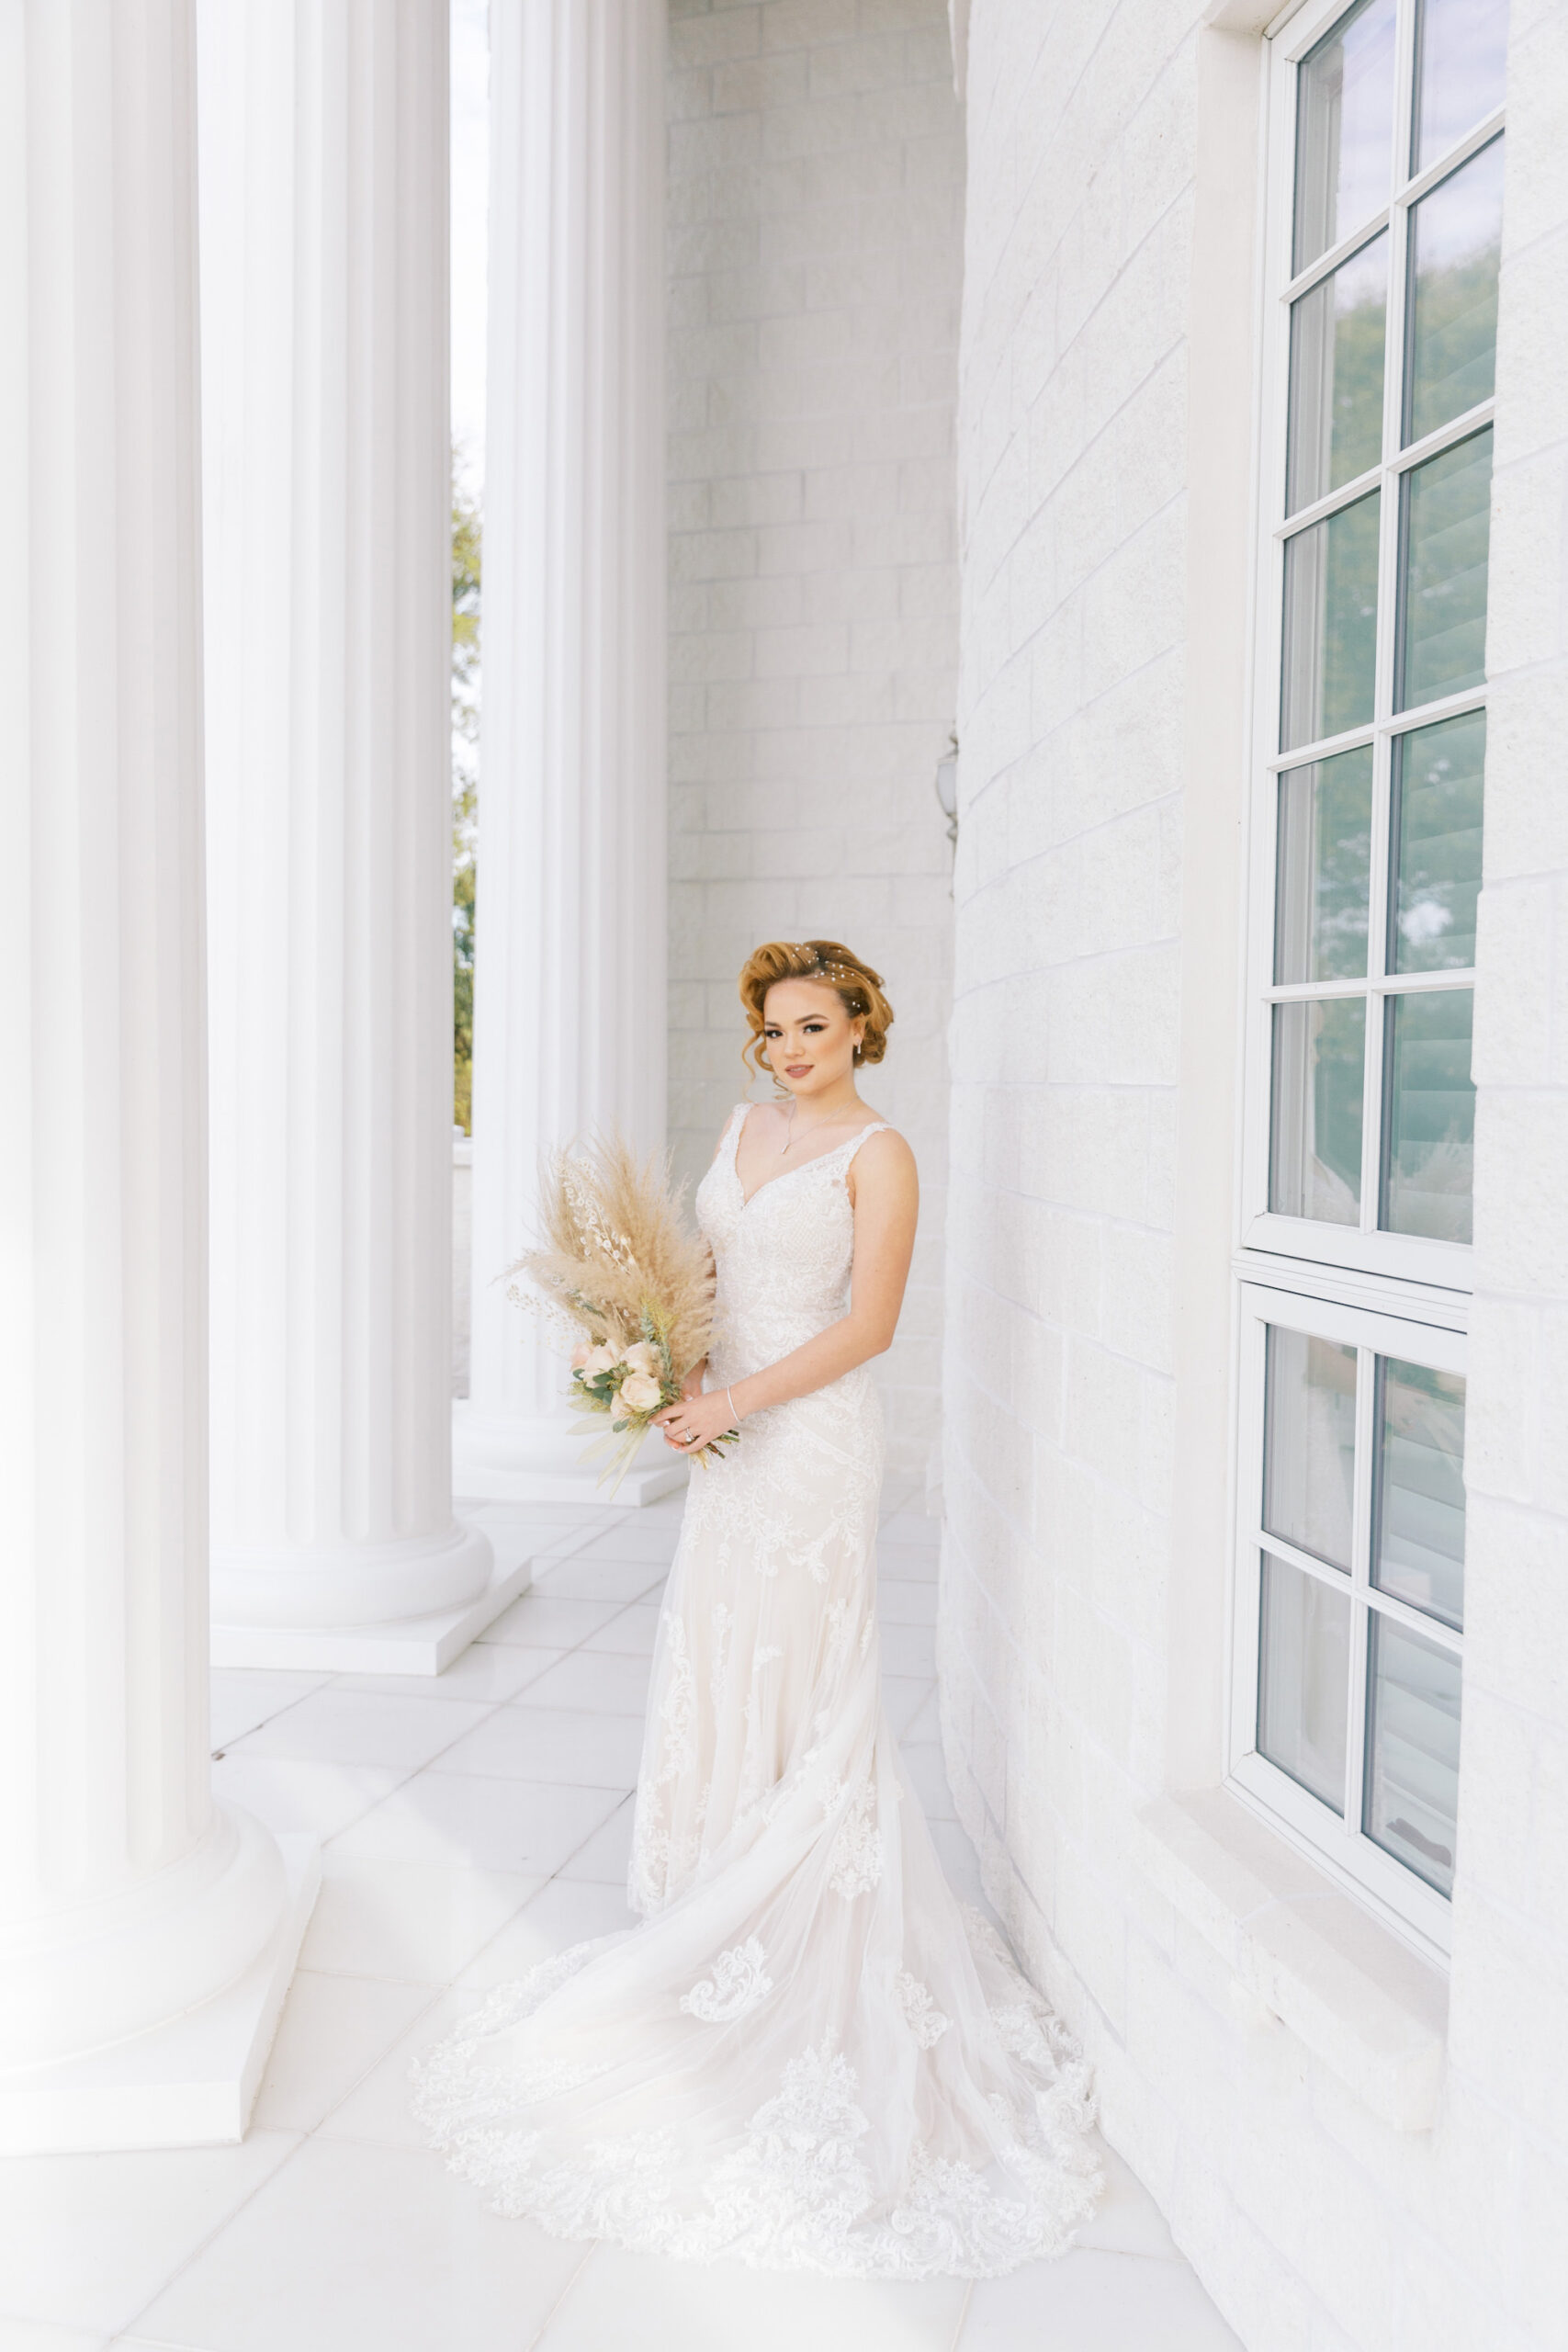 Vintage 1920s Old Hollywood Gatsby Inspired Bride Holding Boho Floral Bouquet with Pampas Grass | Tampa Bay Wedding Venue The Whitehurst Gallery | Hair and Makeup Artist Femme Akoi Beauty Studio